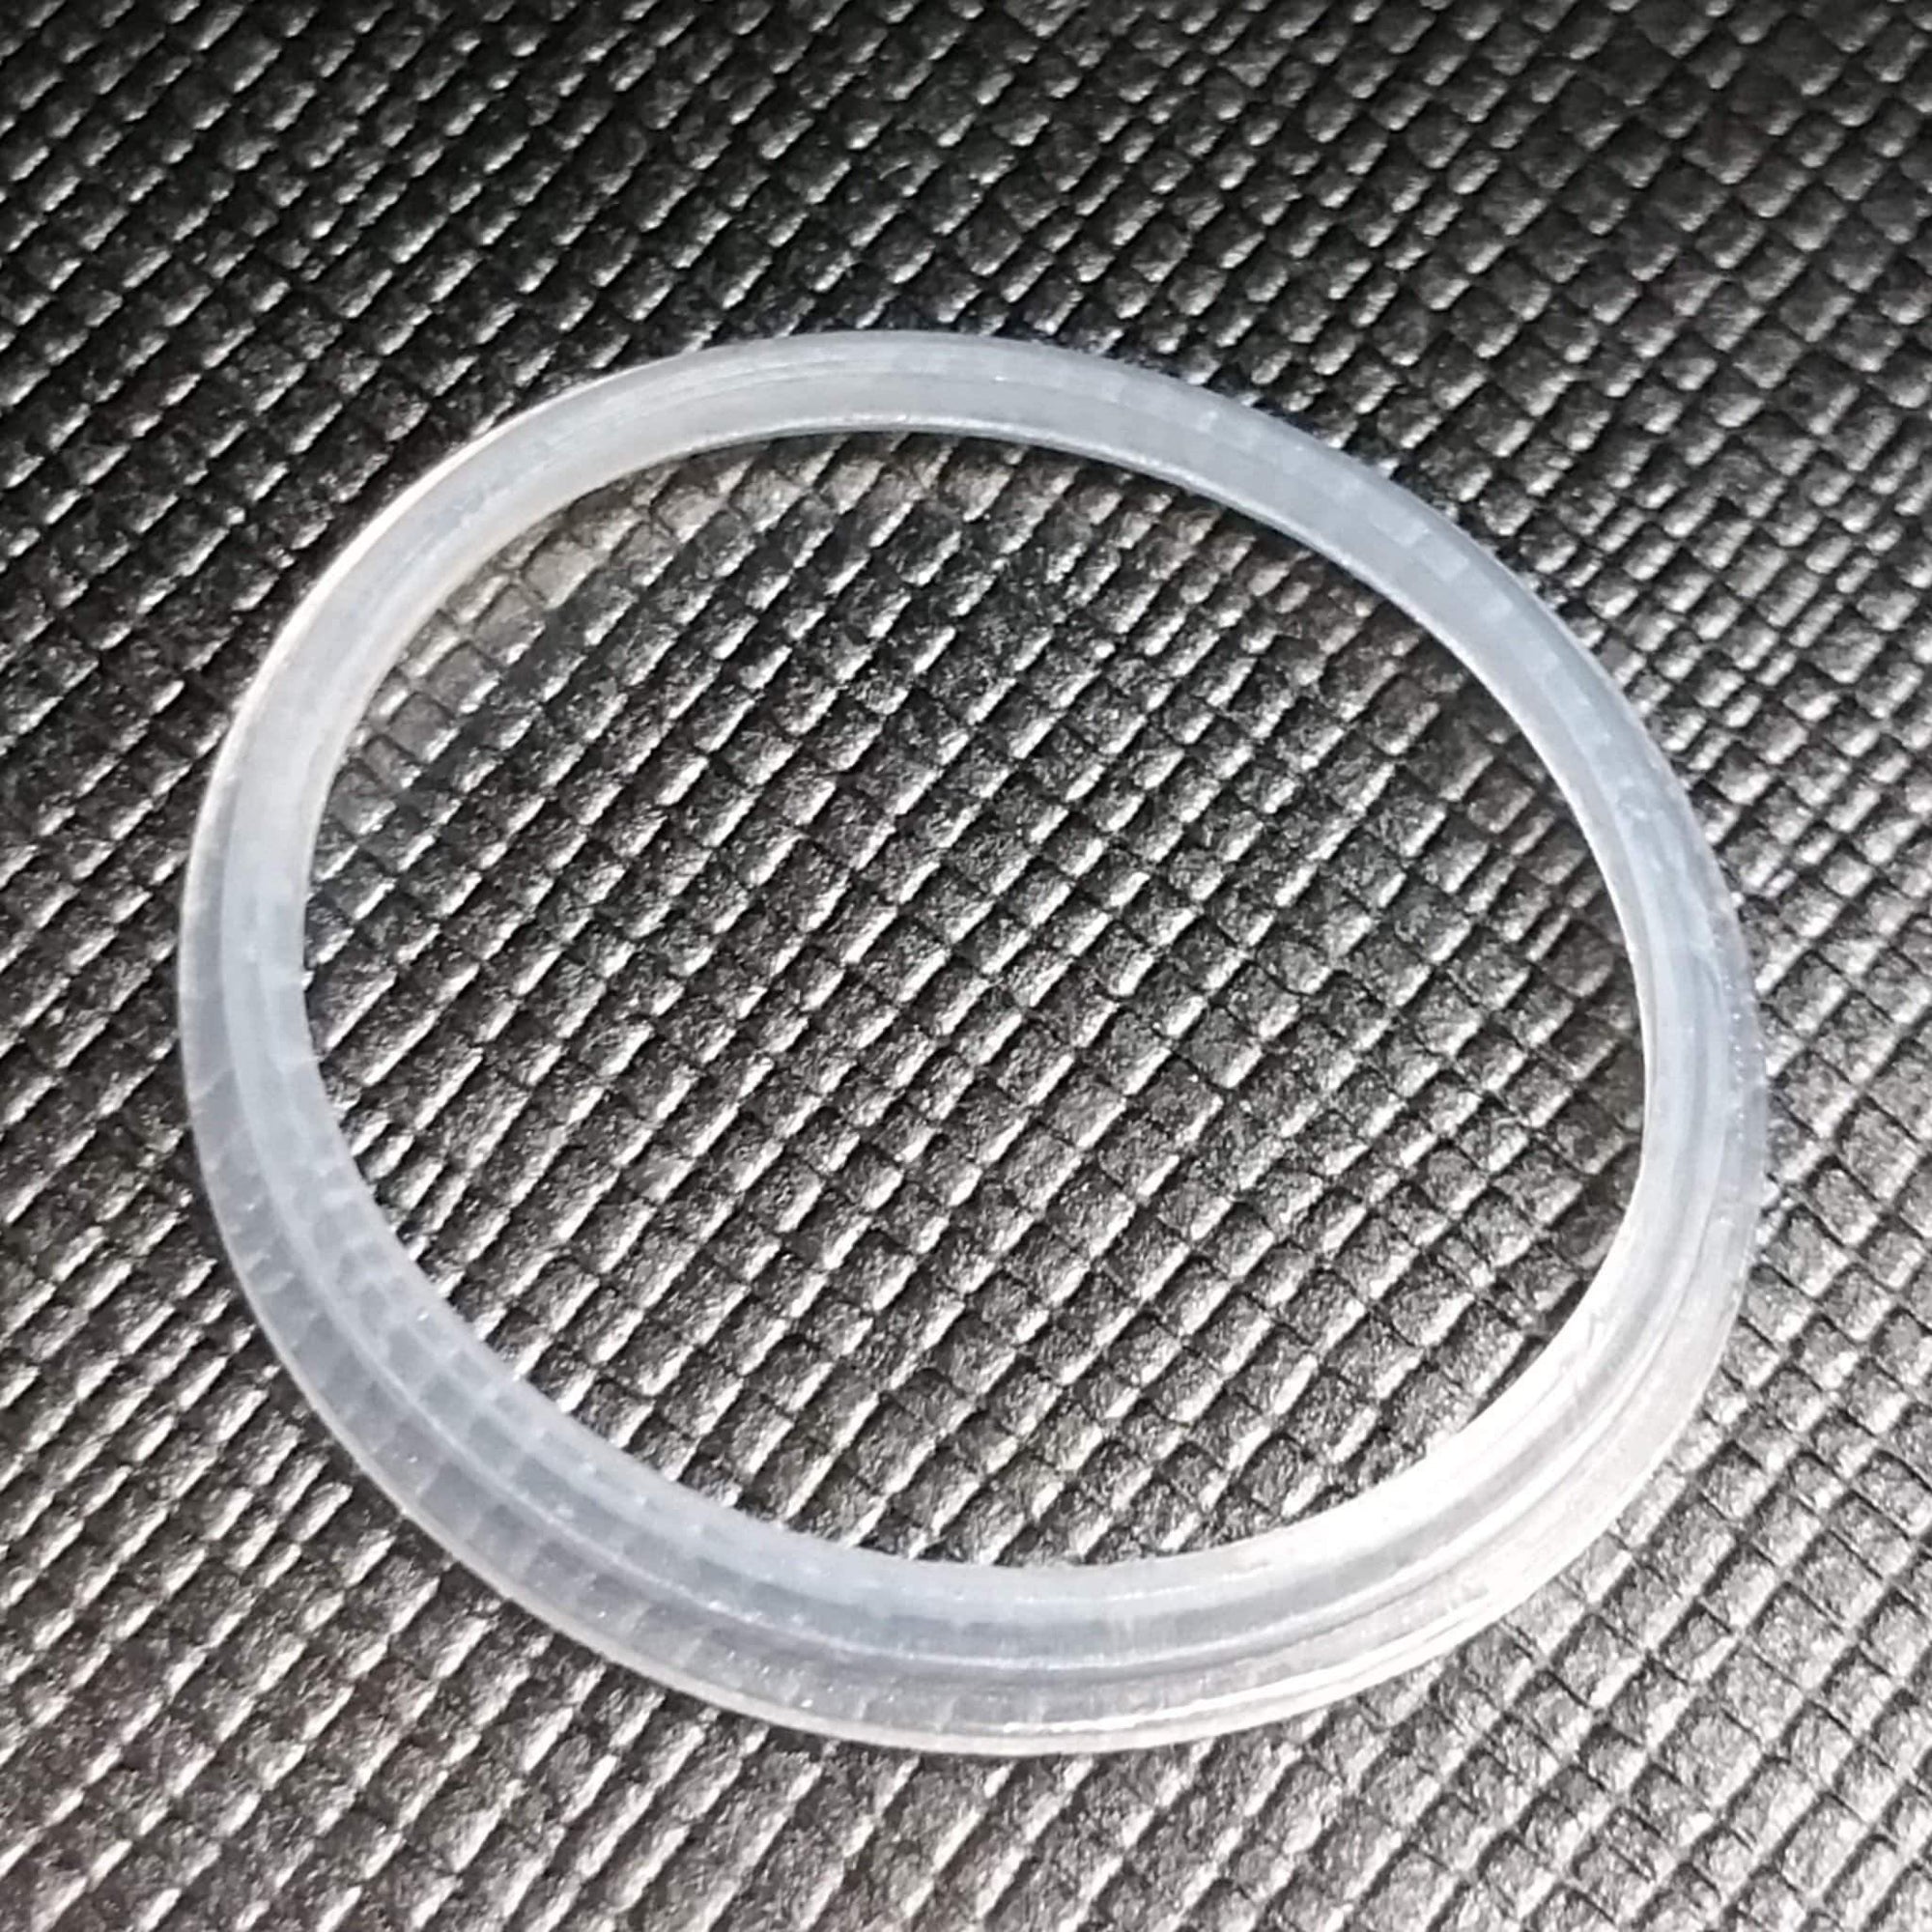 TFV4 Plus Replacement Seals TOP White Disc Seal Seals/Oring's